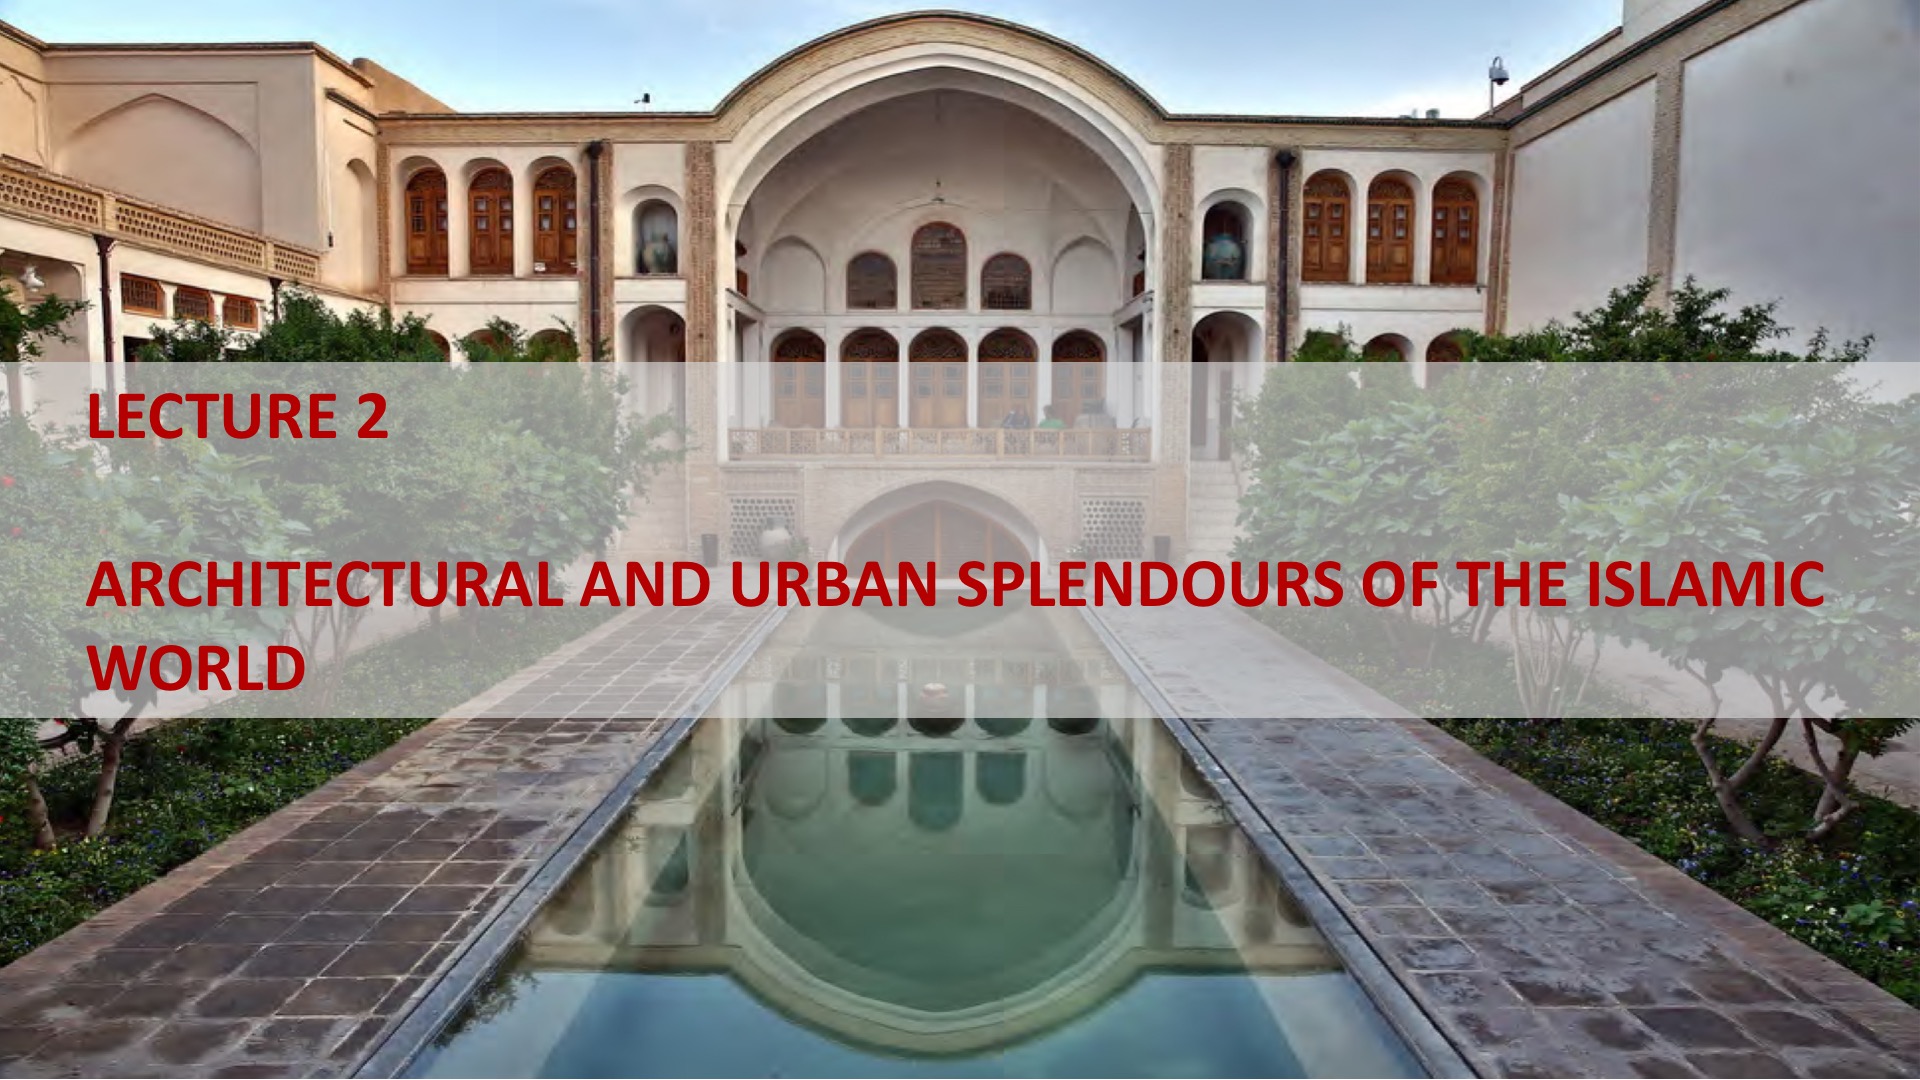 Lecture 2: Architectural and Urban Splendours of the Islamic World